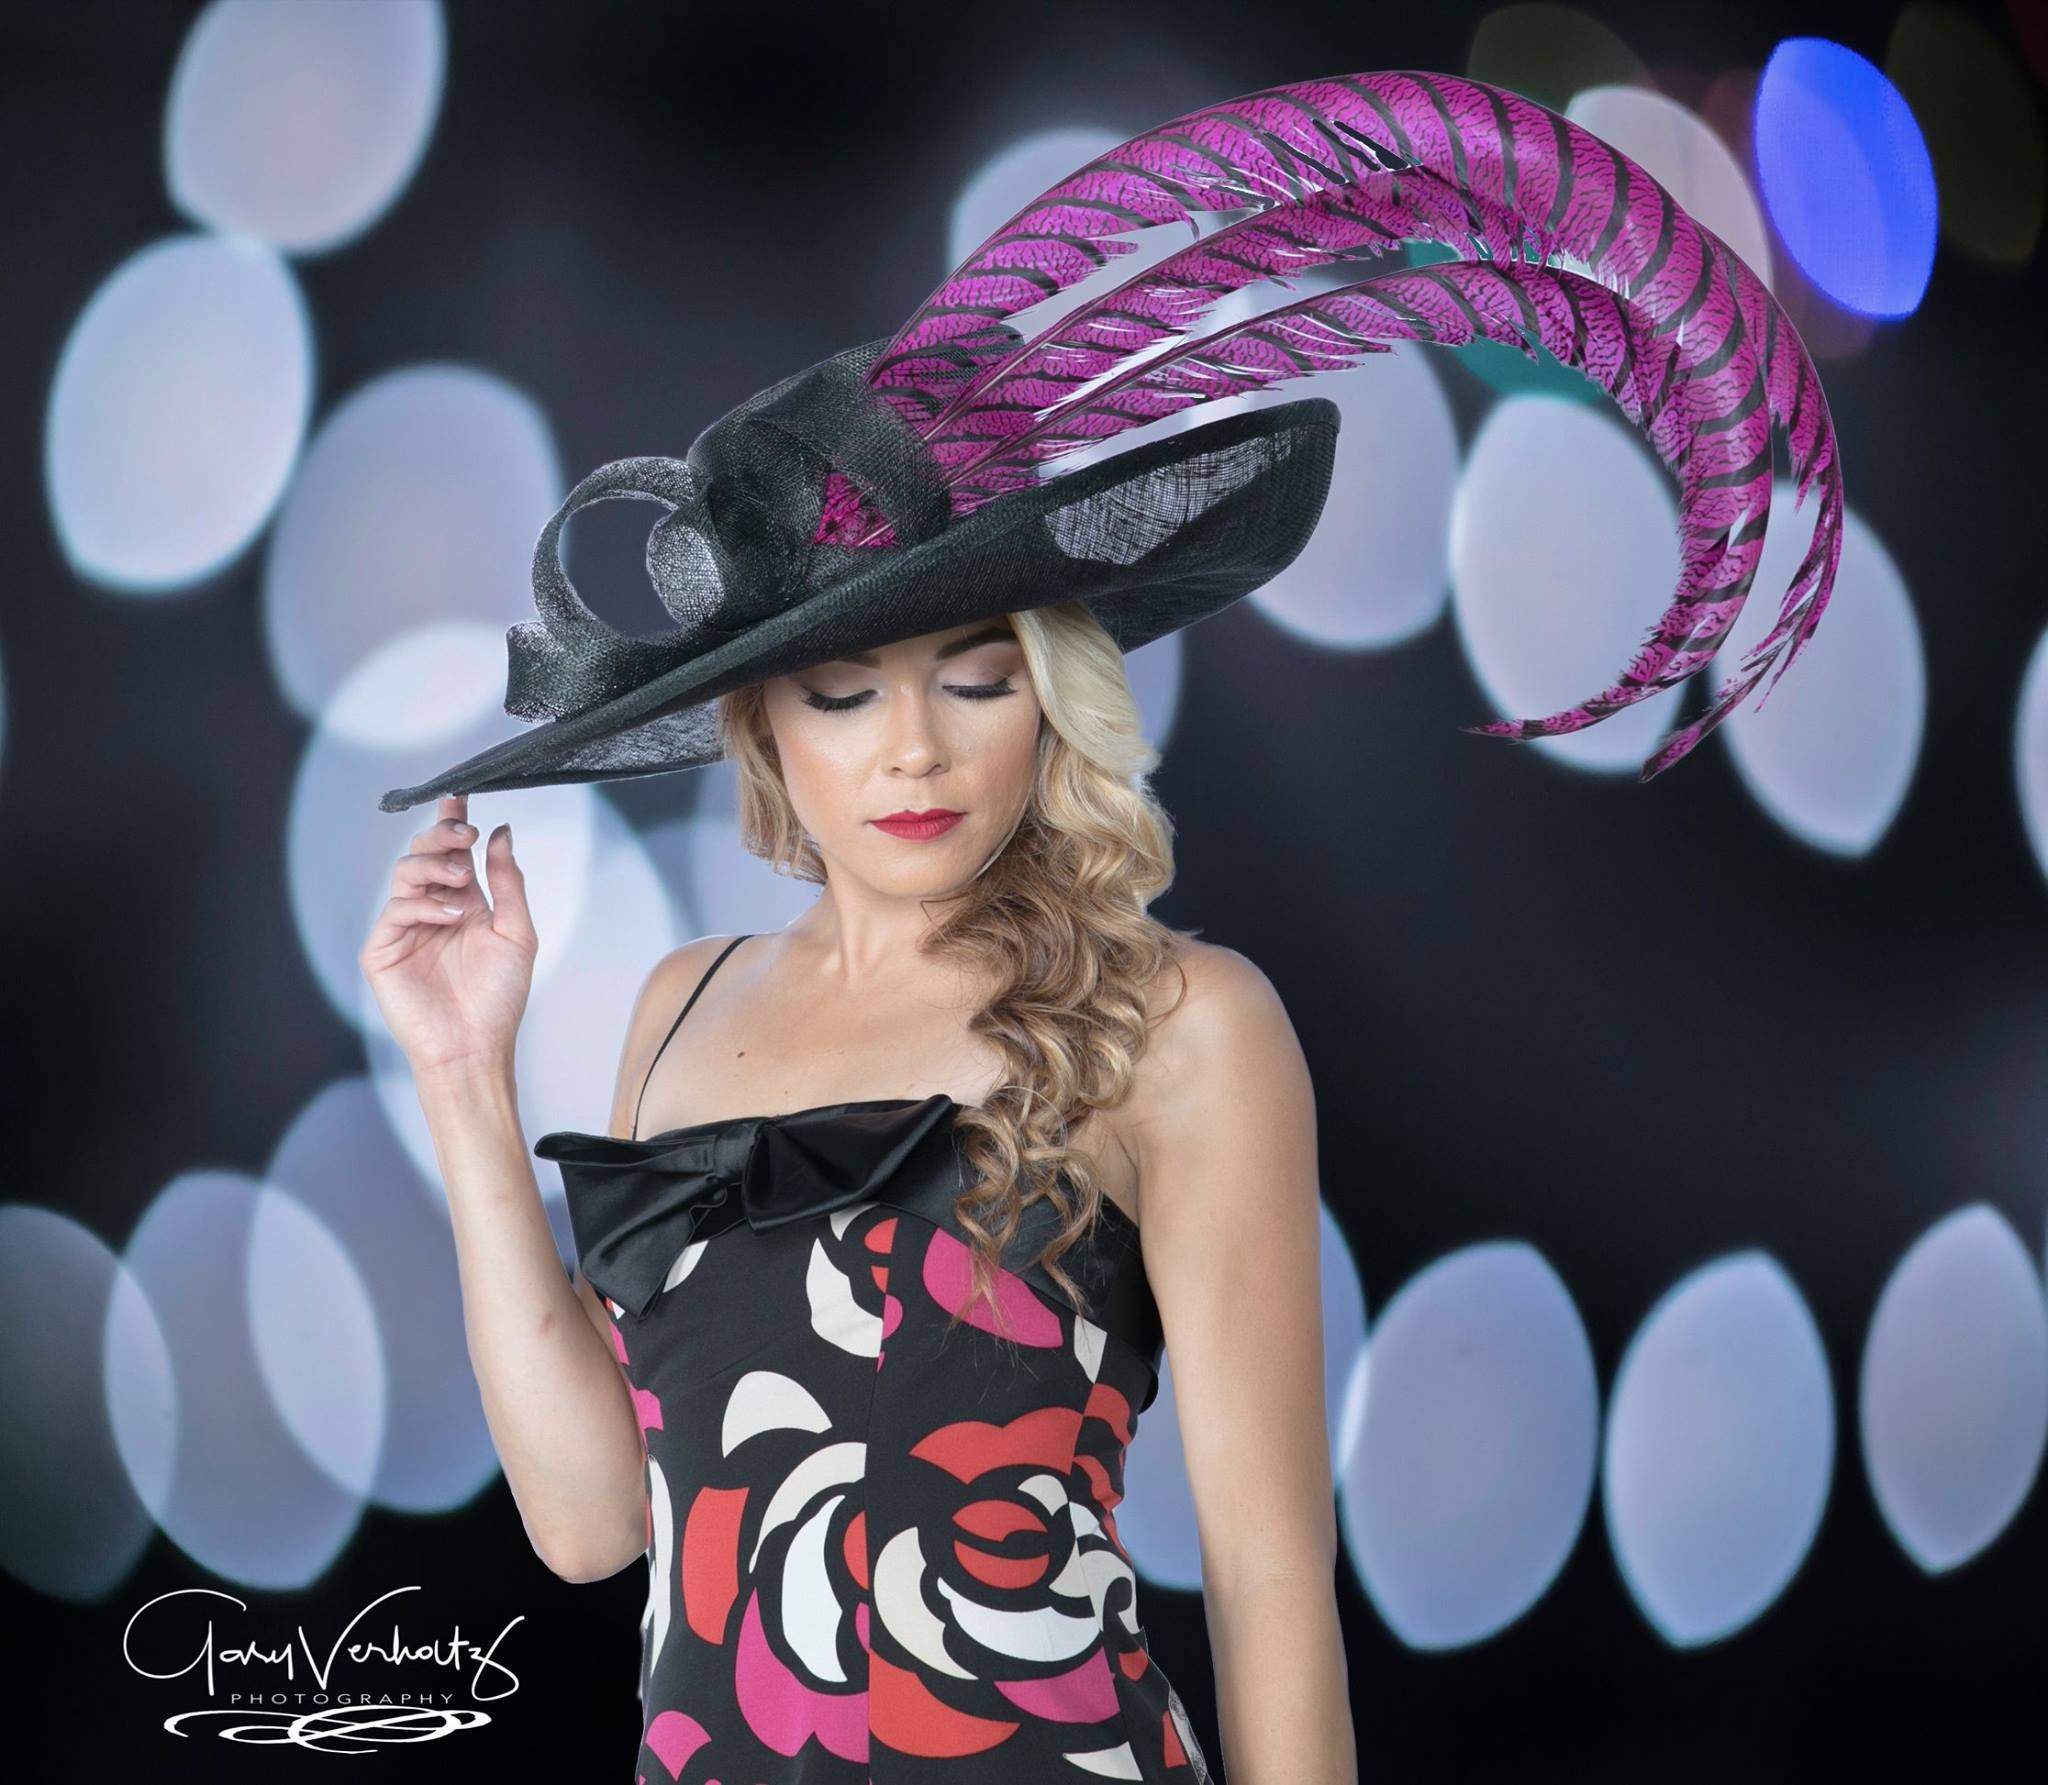 Kentucky Derby Hat. Formal hat. Del Mar , Black hat. Royal Ascot hat. Women Couture hat for weddings, races, church and other ocaasions